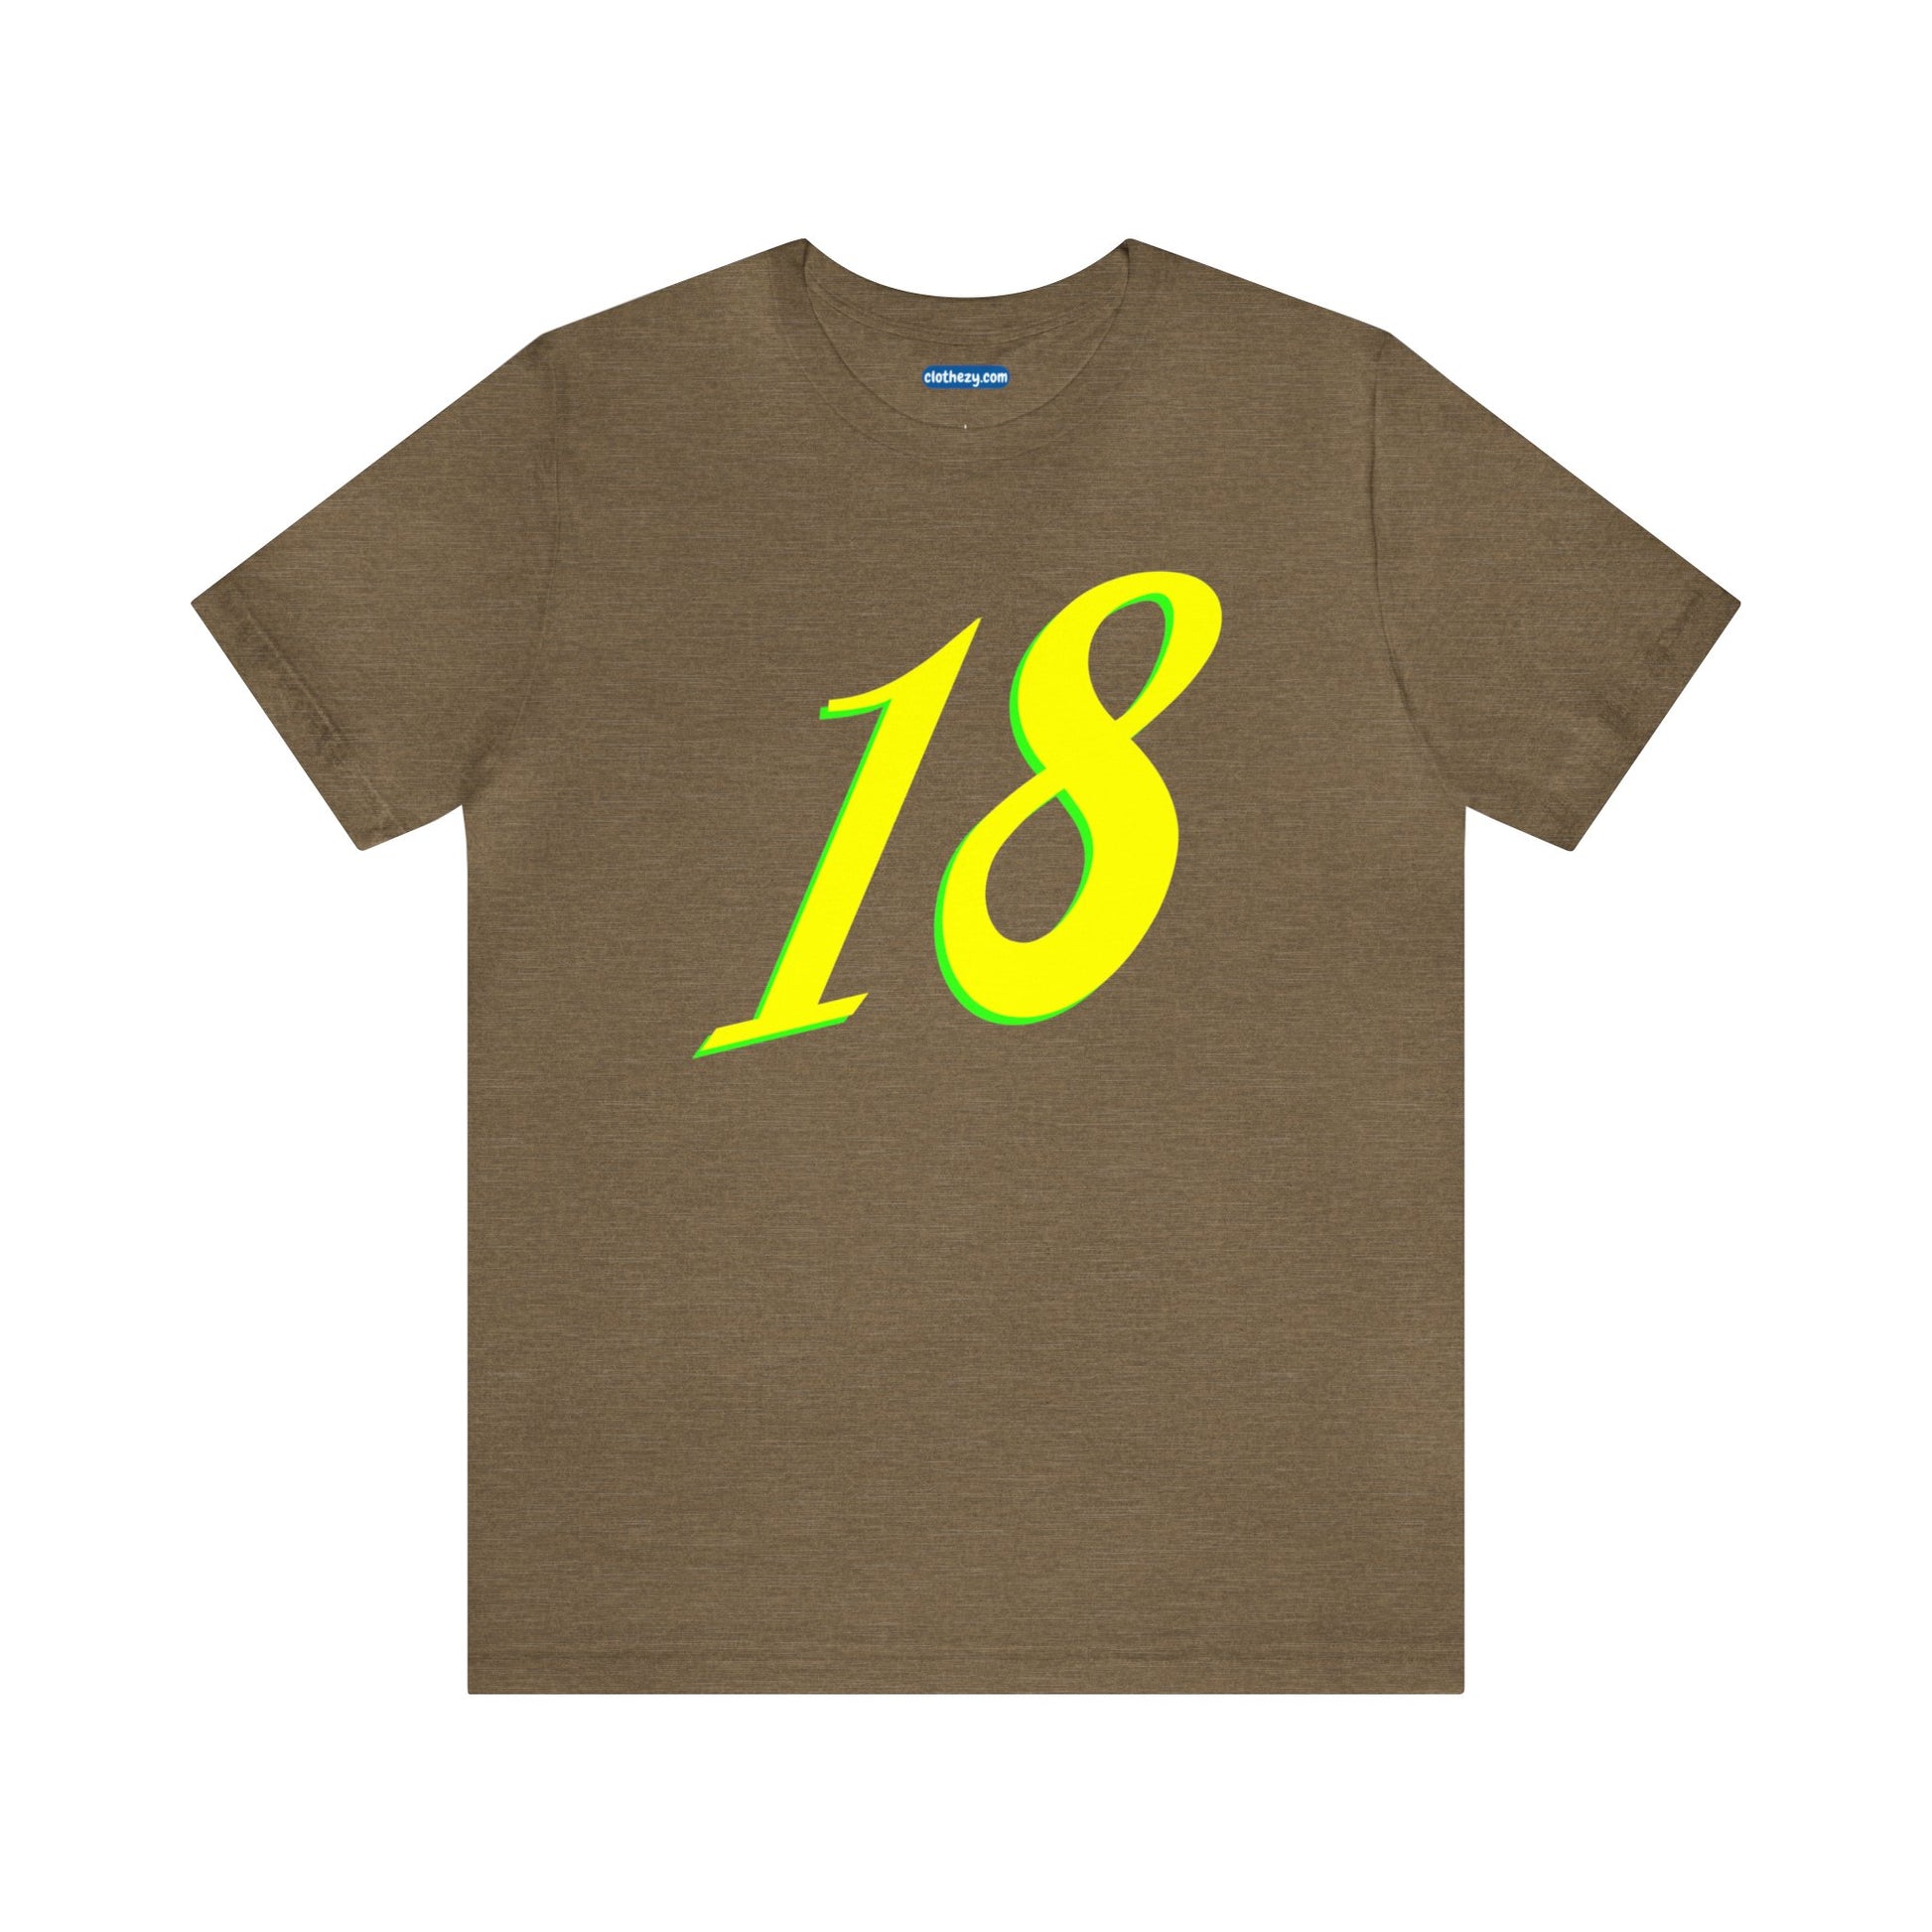 Number 18 Design - Soft Cotton Tee for birthdays and celebrations, Gift for friends and family, Multiple Options by clothezy.com in Olive Heather Size Small - Buy Now